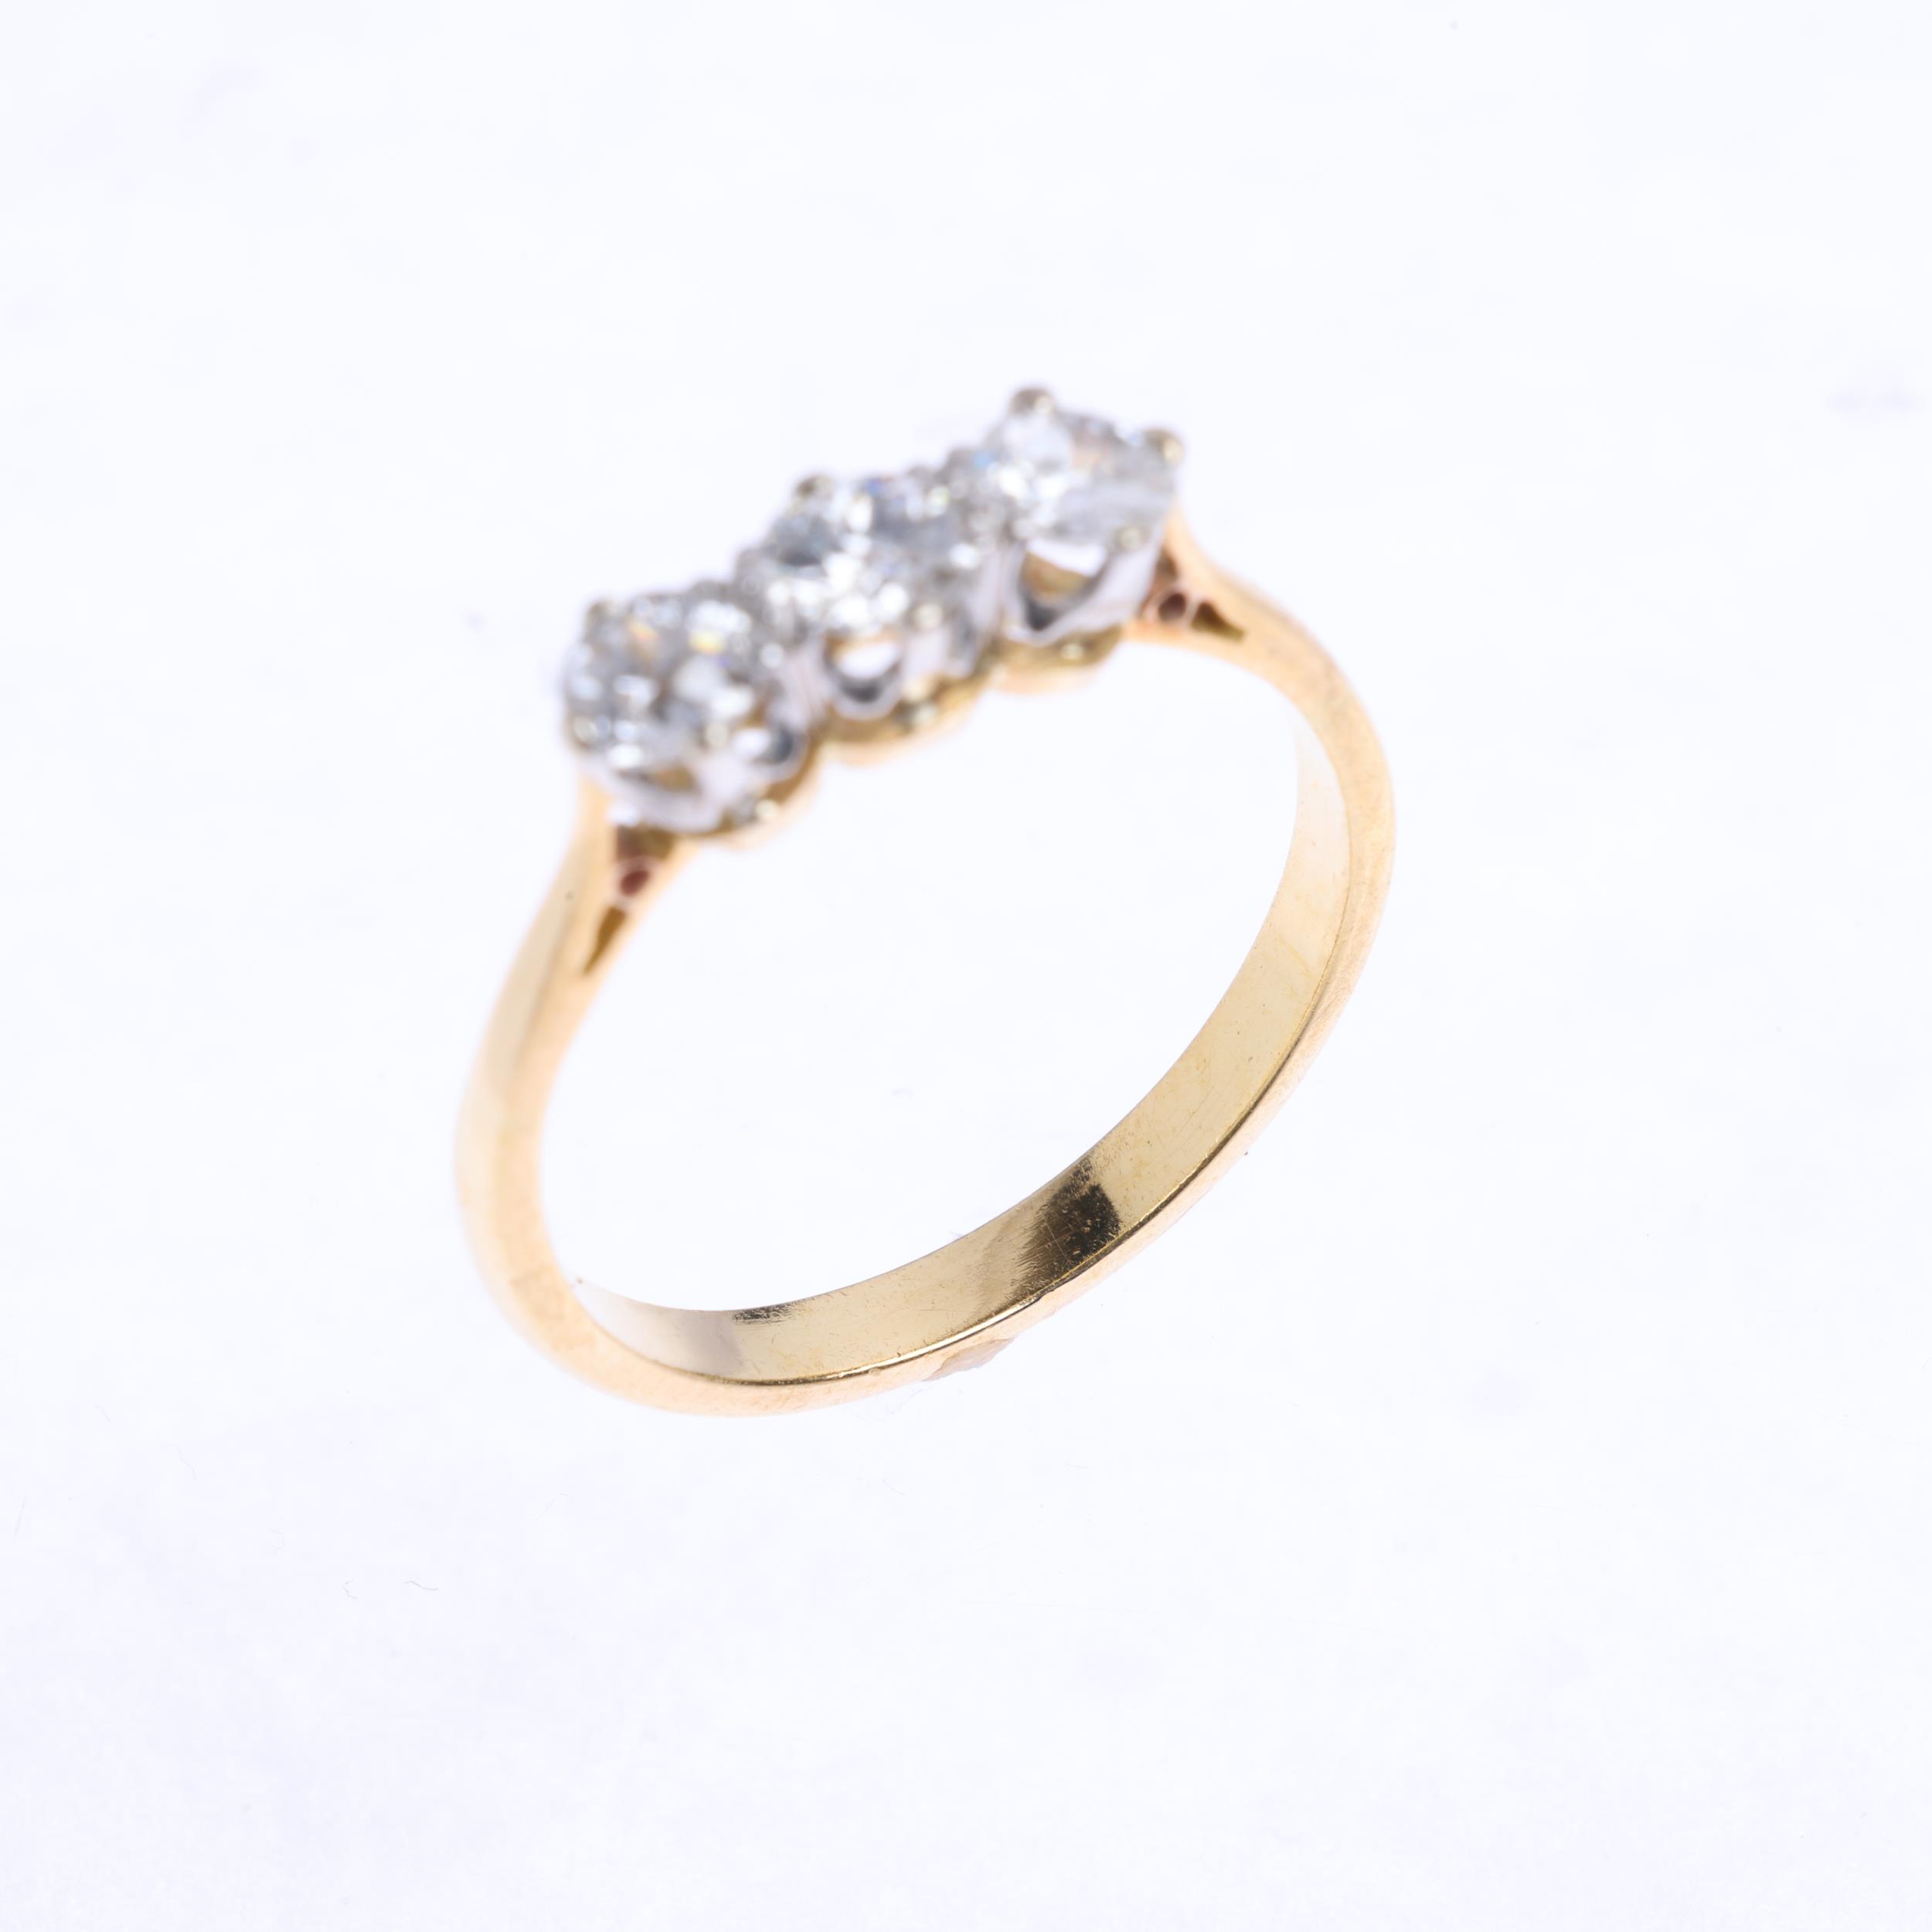 A three stone diamond ring, claw set with old European-cut diamonds, total diamond content approx - Image 3 of 4